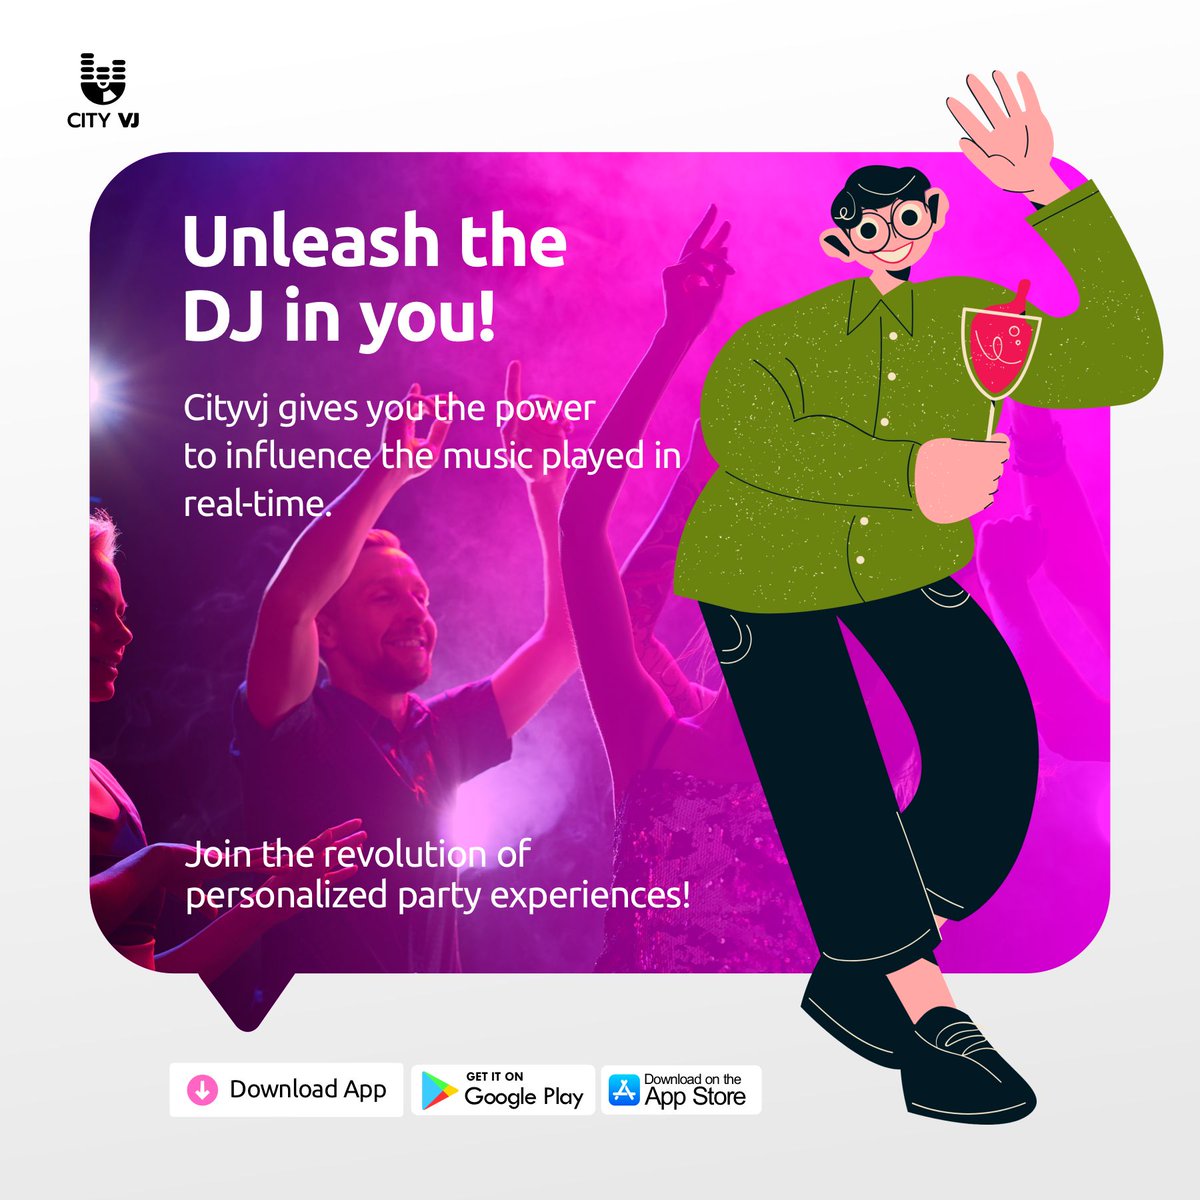 Do you ever think to yourself on your way back from a party or event, 'I think I could be a DJ too or I wish the DJ played my favourite songs the crowd would have enjoyed it'
Enough thinking and wishing, here's your chance👉 visit cityvj.com

#newapp #productrelease